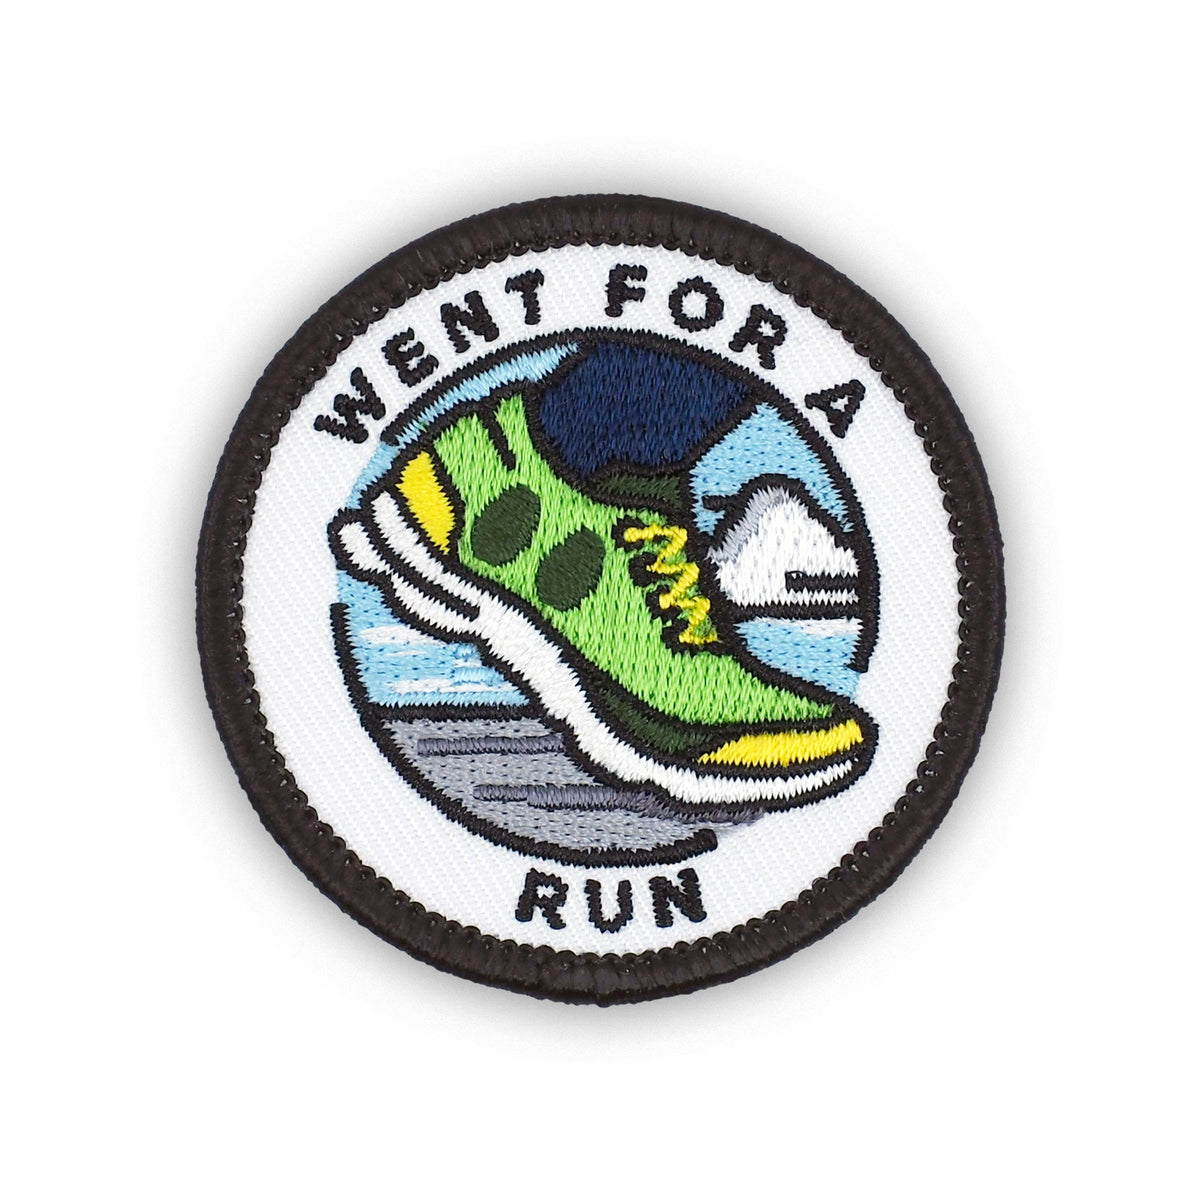 Went For A Run individual adulting merit badge patch for adults